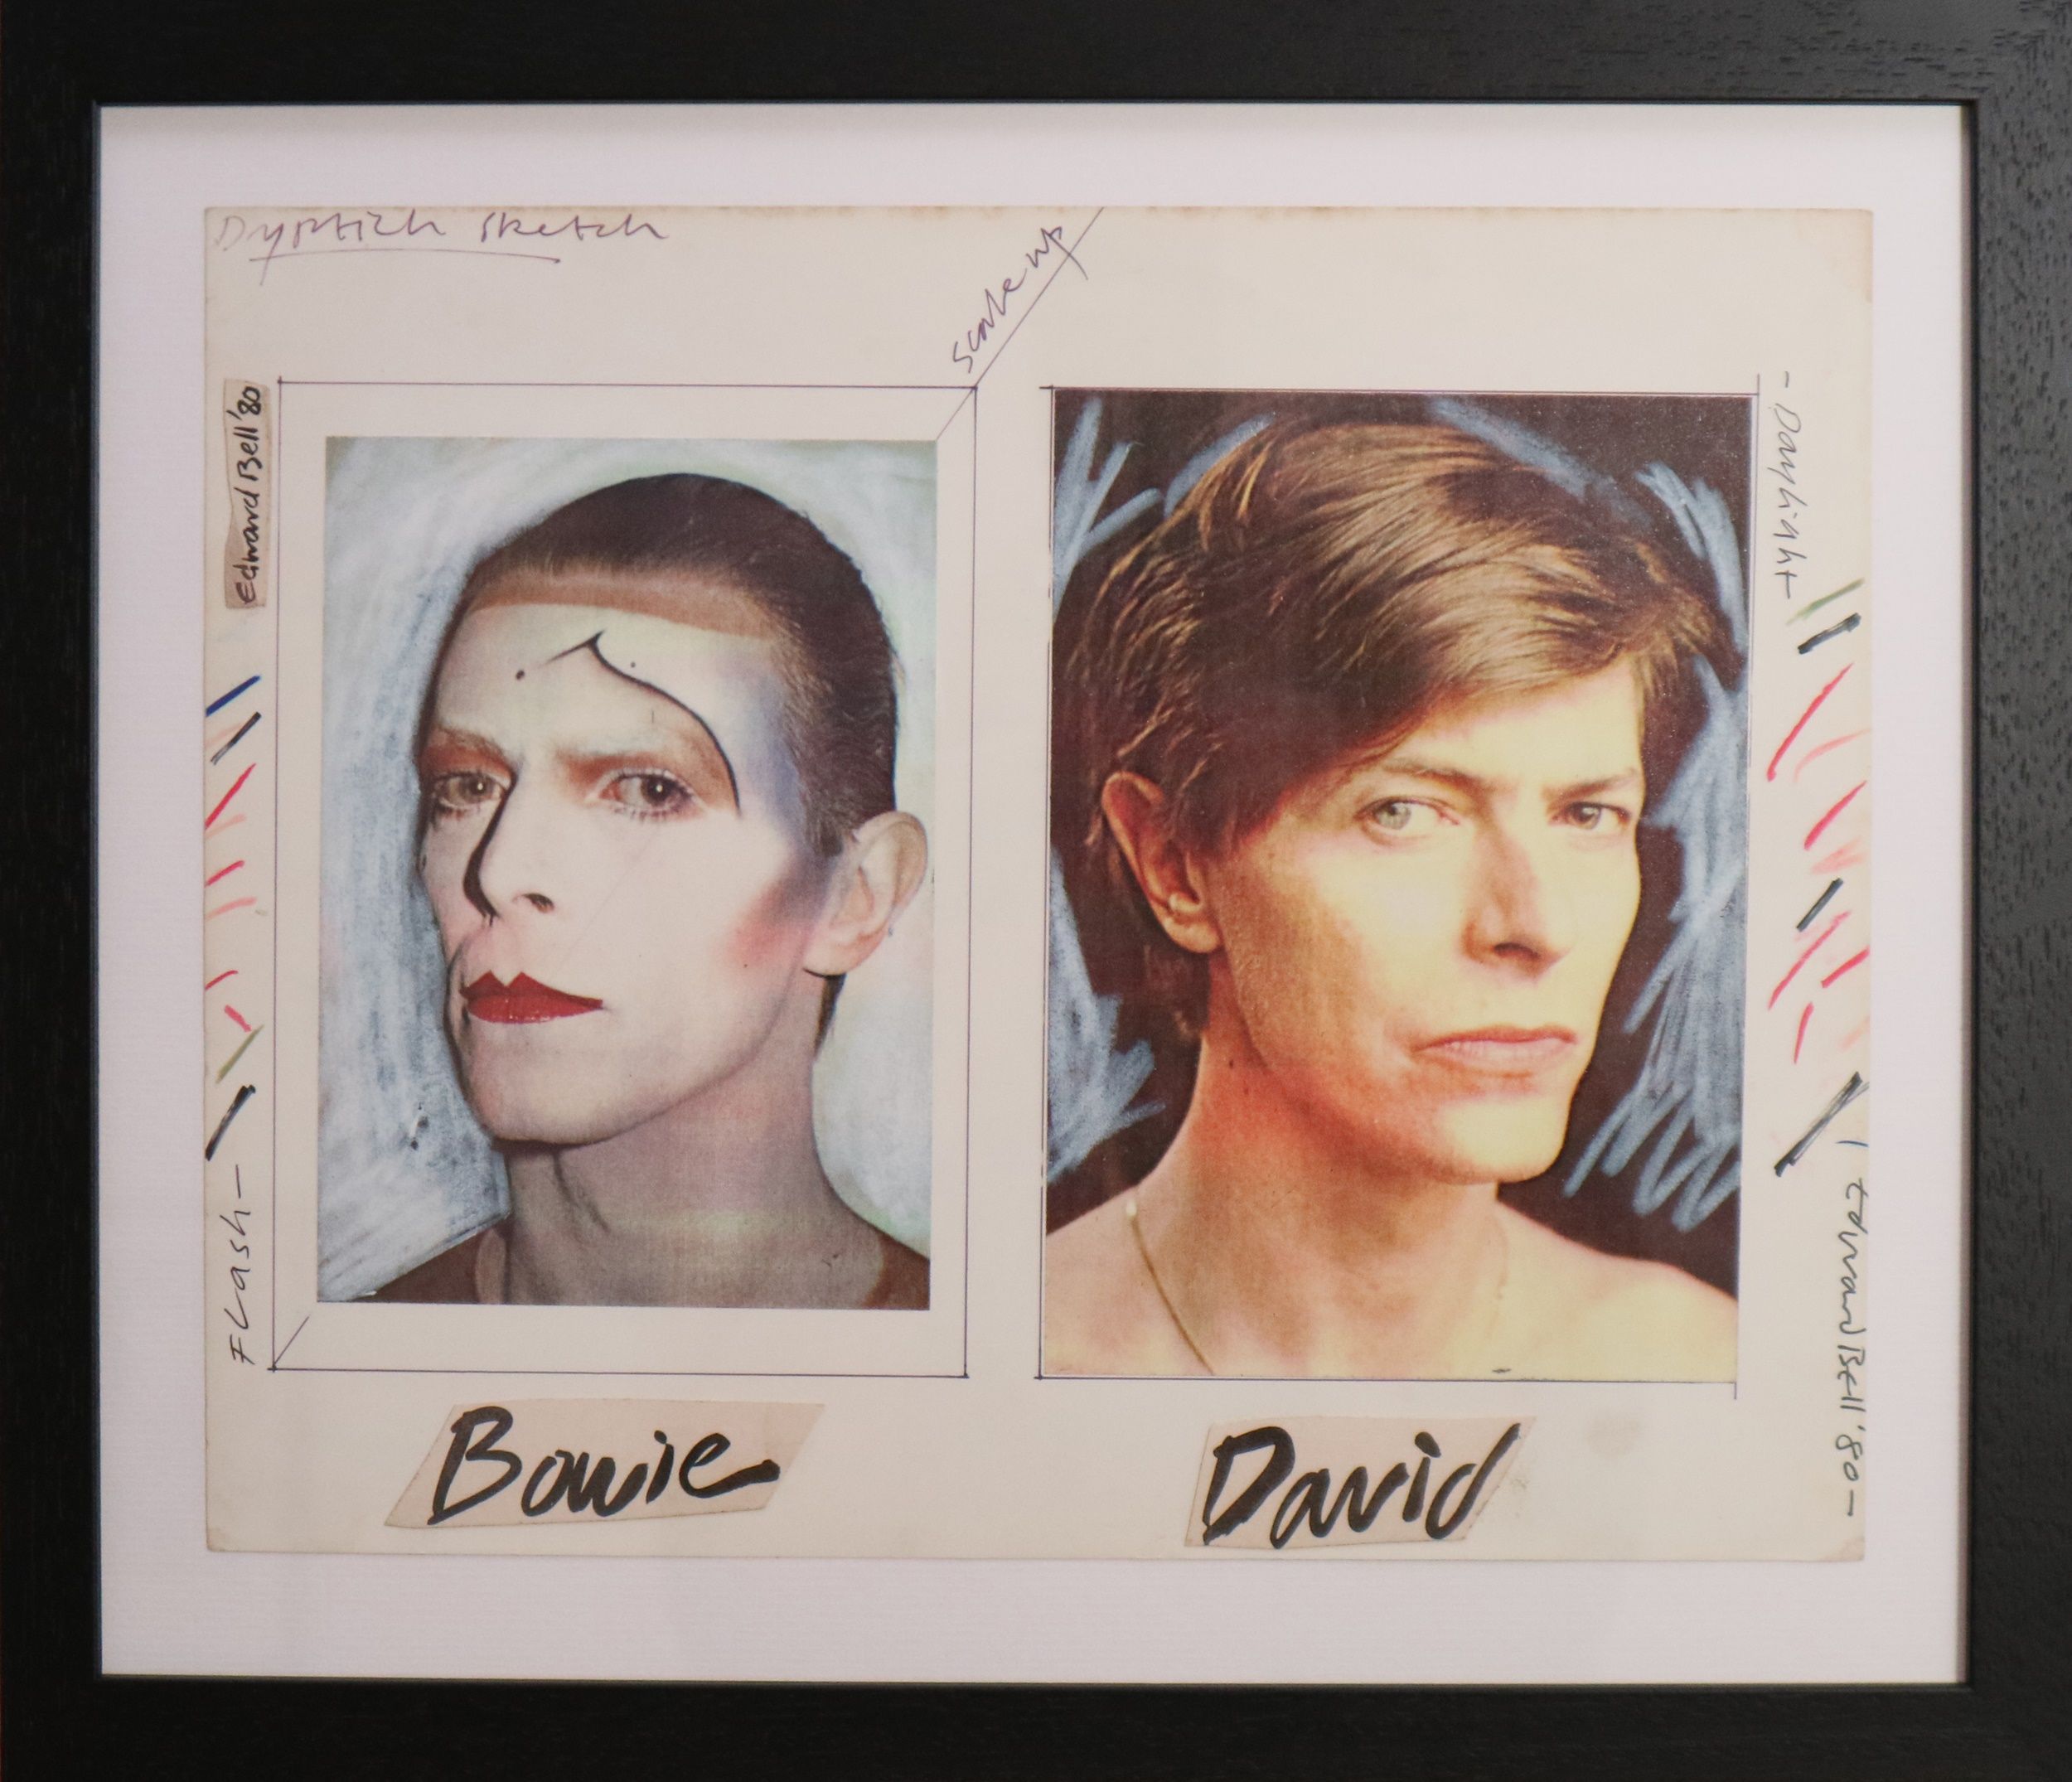 Let's bid: David Bowie album artwork for sale, direct from the 